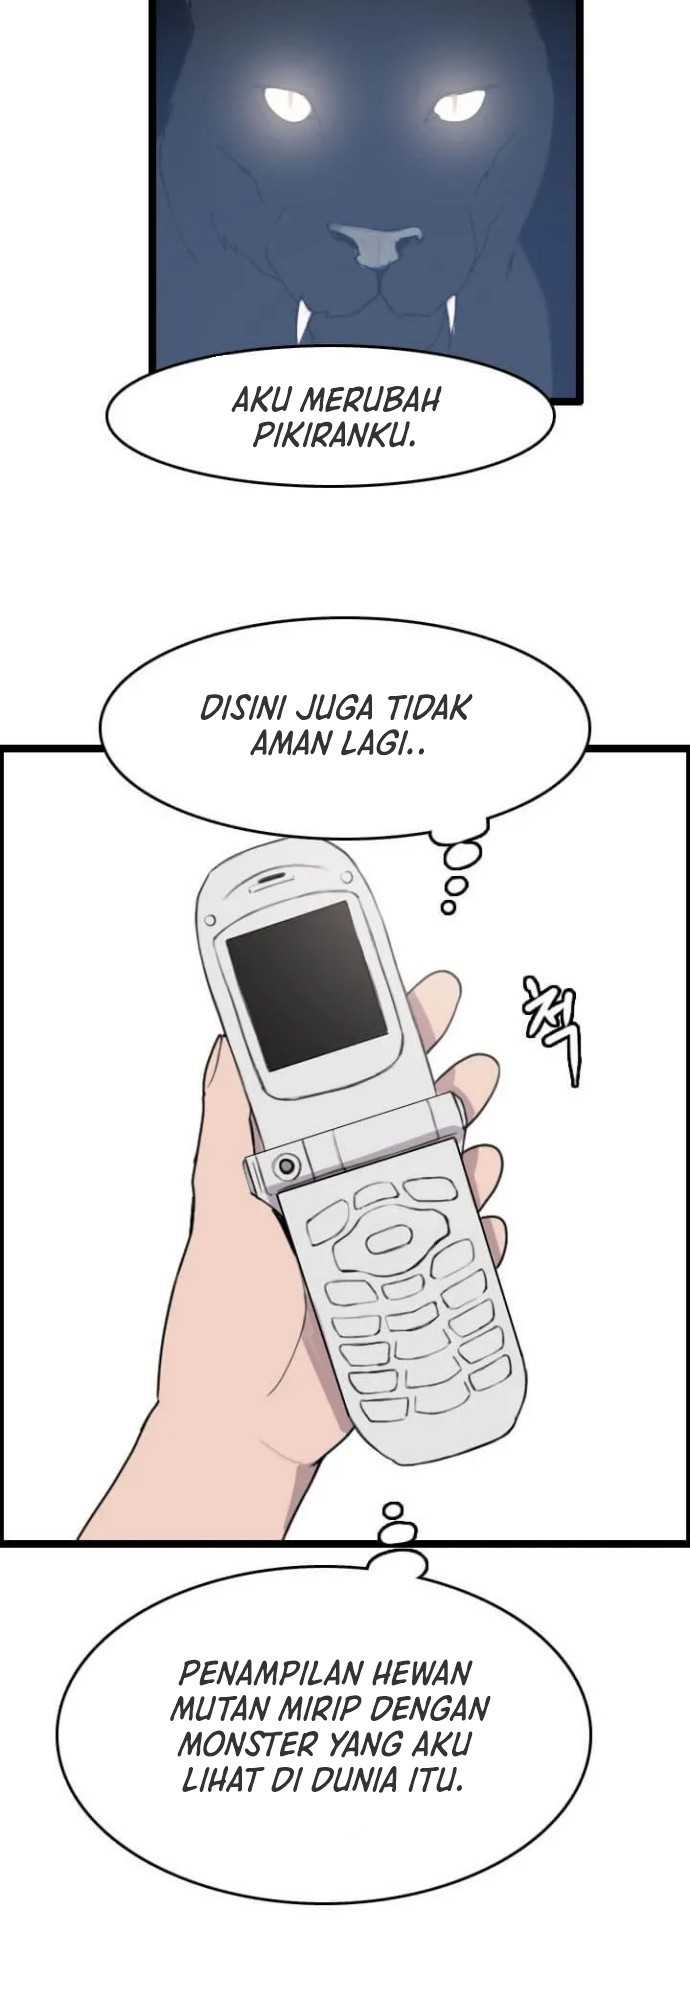 I Picked A Mobile From Another World Chapter 08